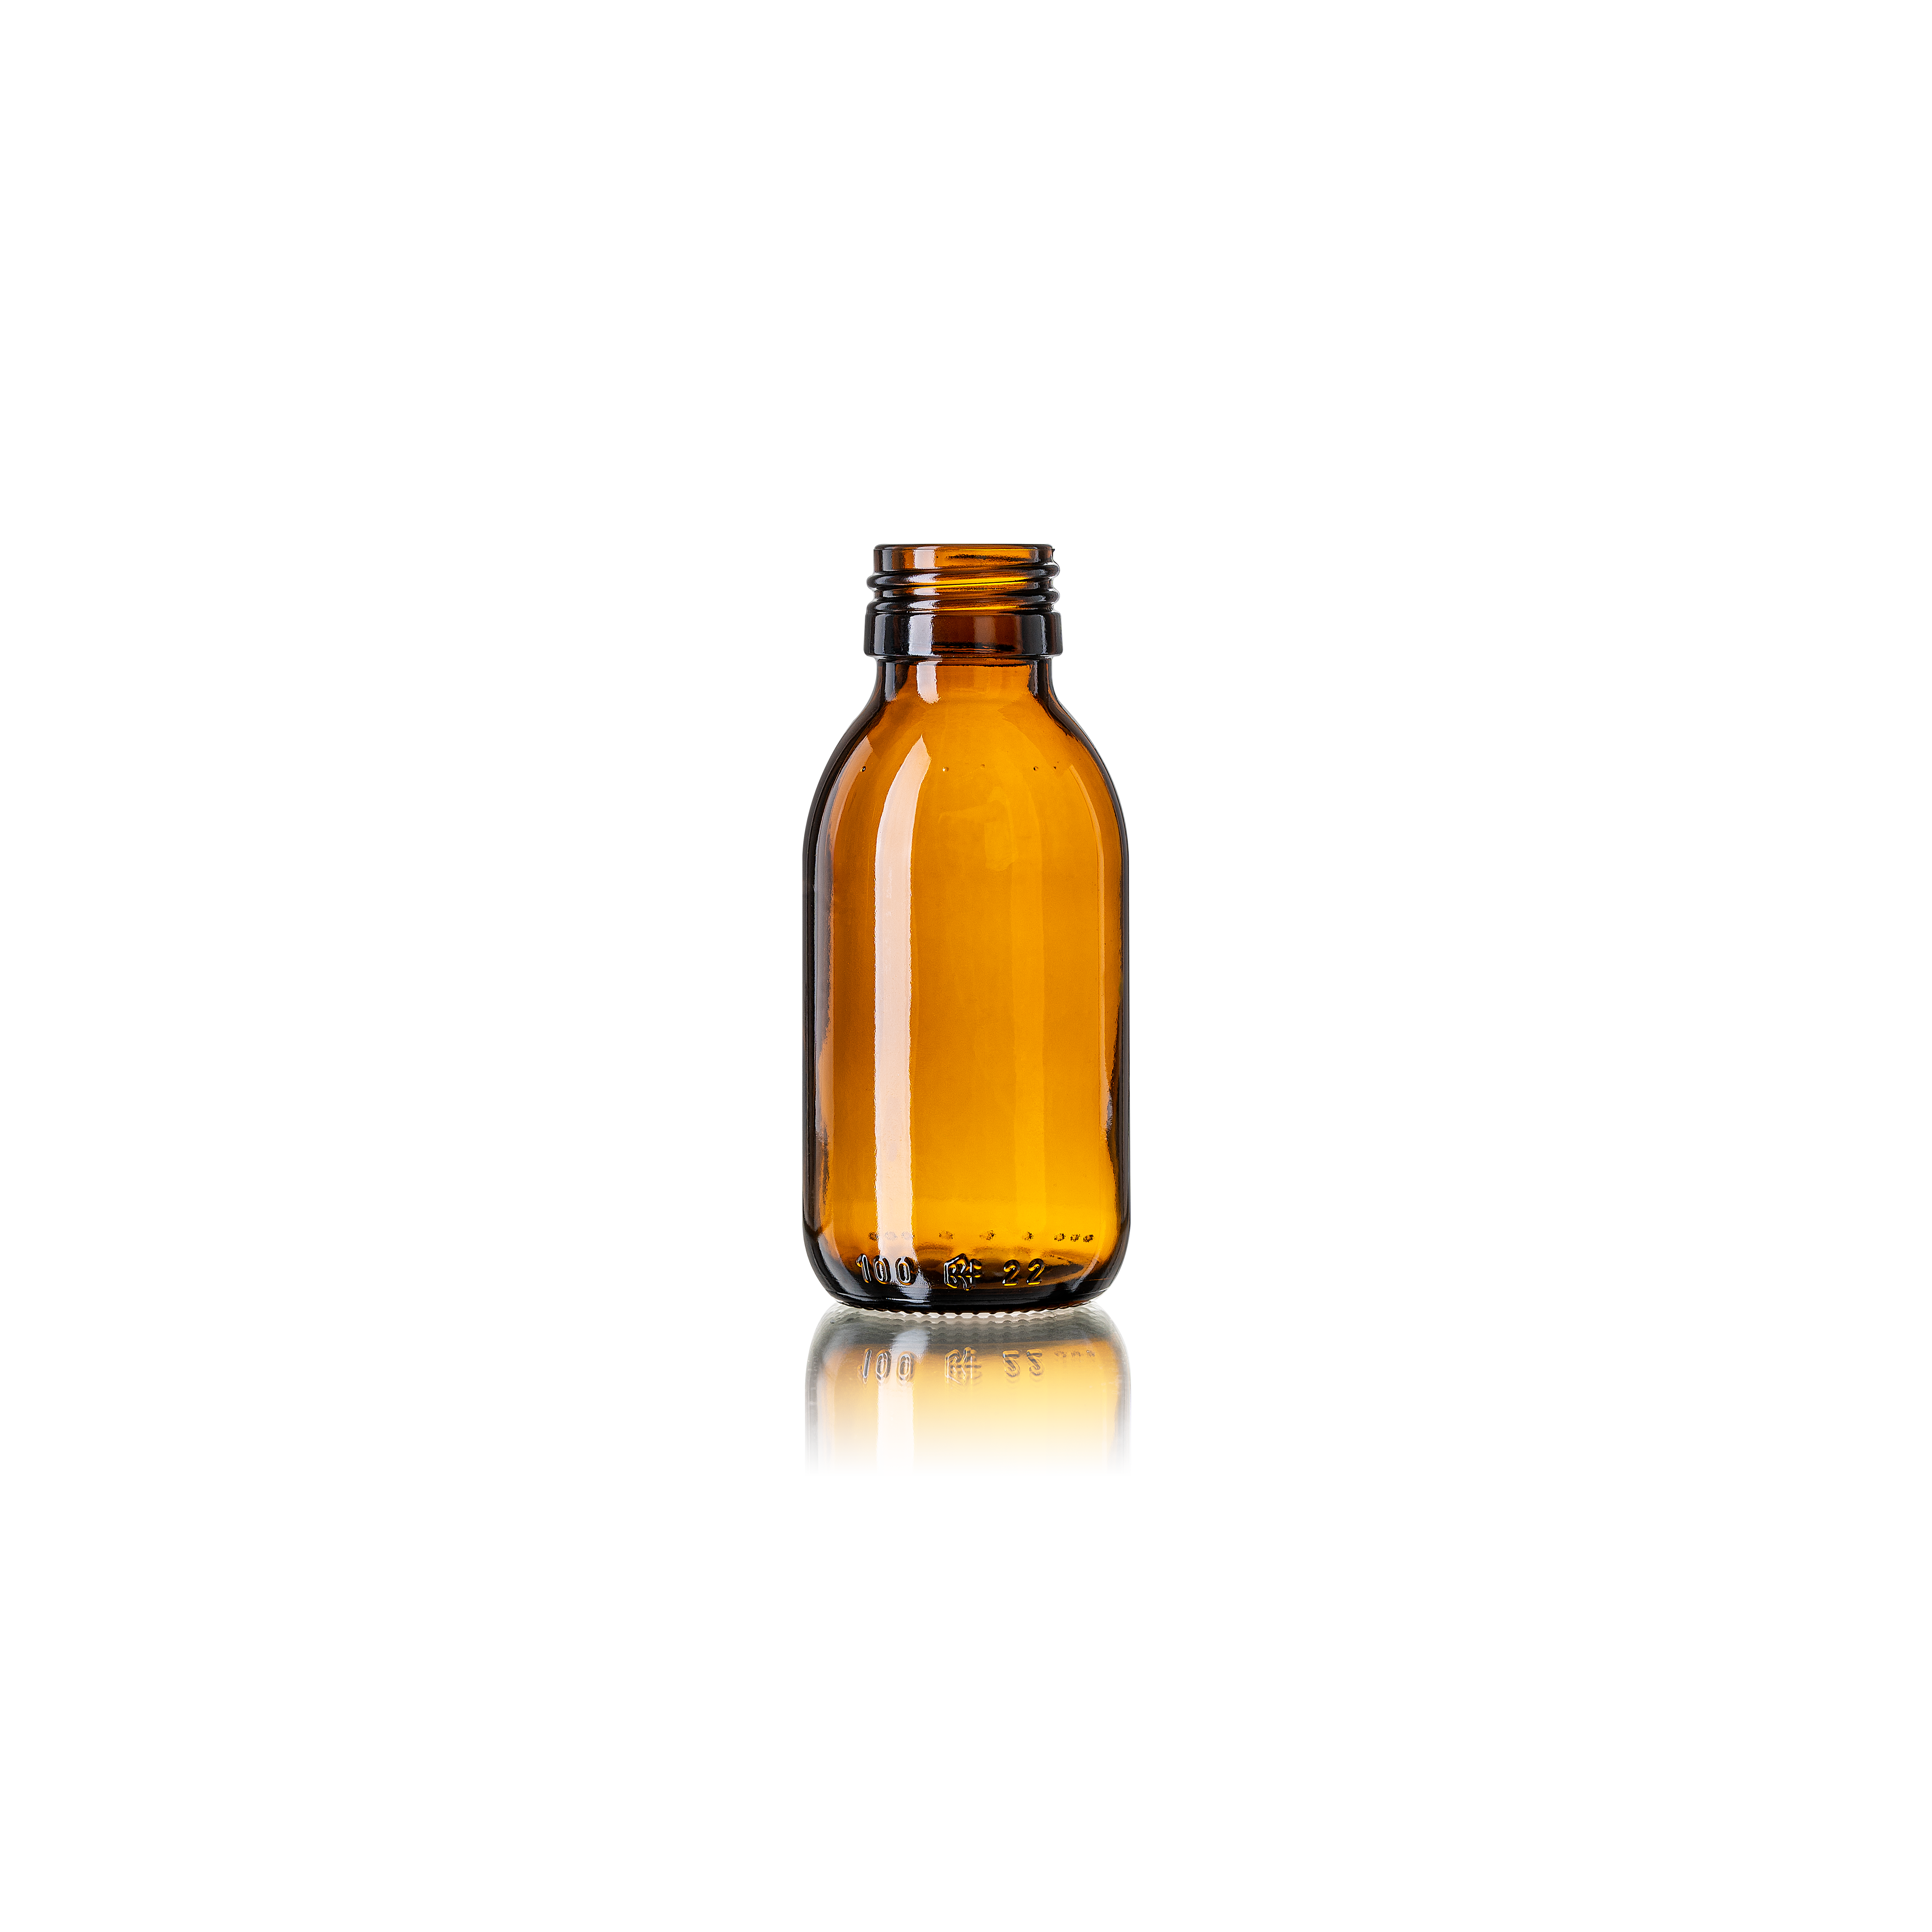 Syrup bottle Thyme 100ml, PP28, Amber